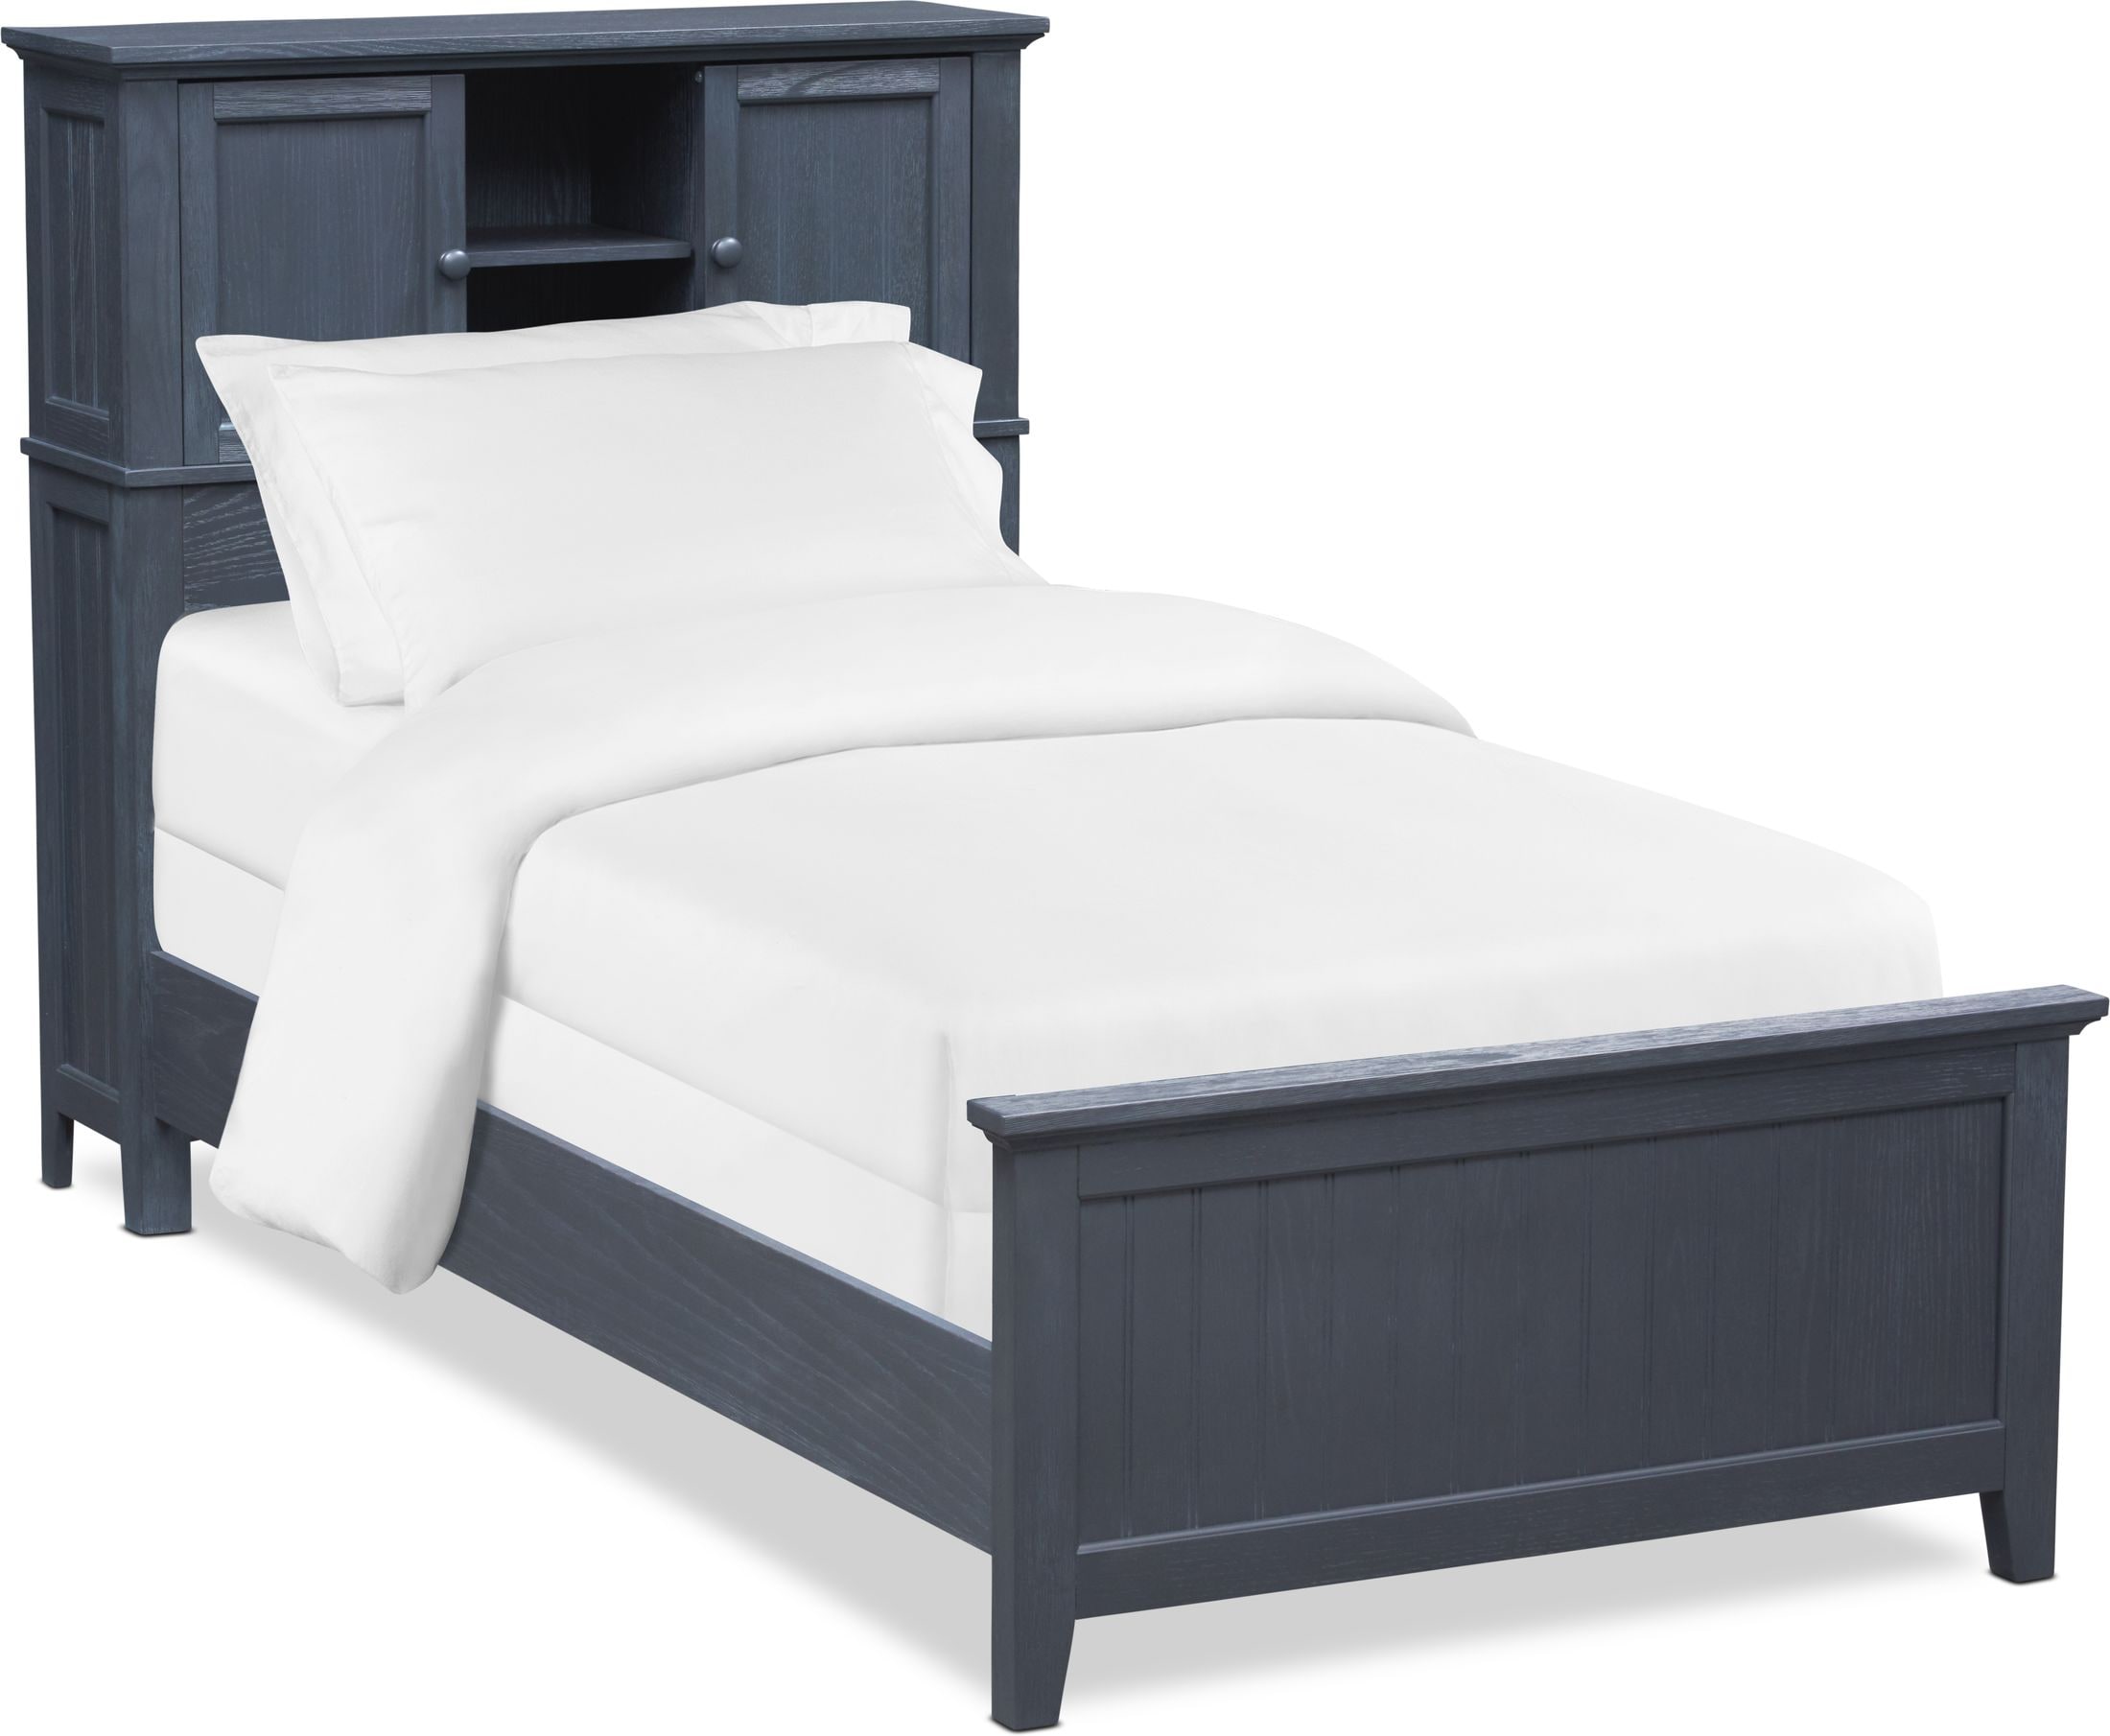 Undefined Value City Furniture, Value City Twin Beds